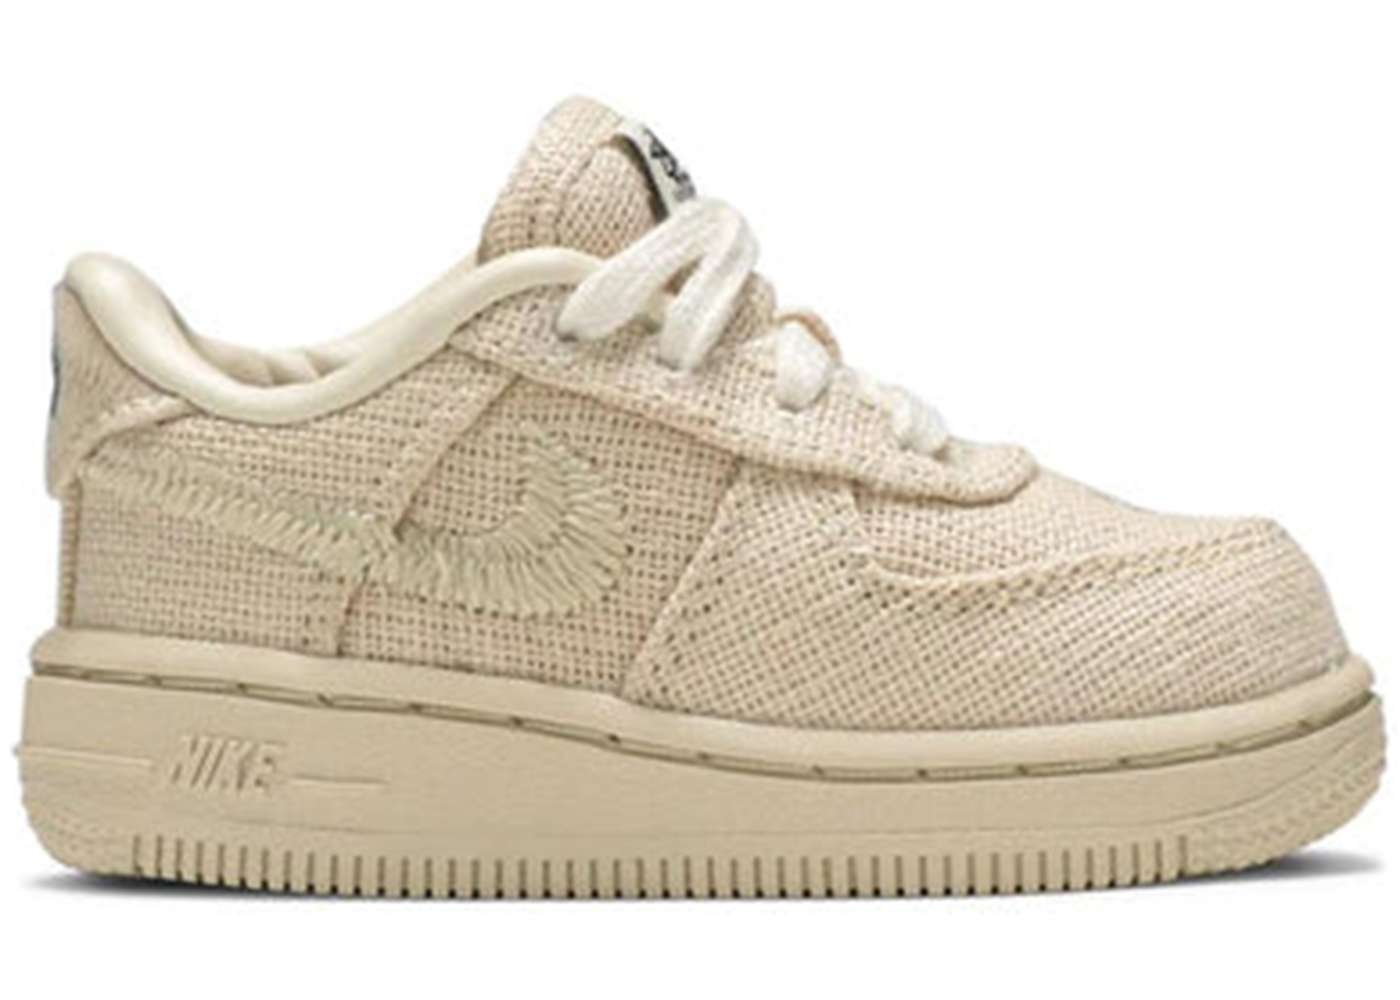 Nike Air Force 1 Low Stussy Fossil (TD)